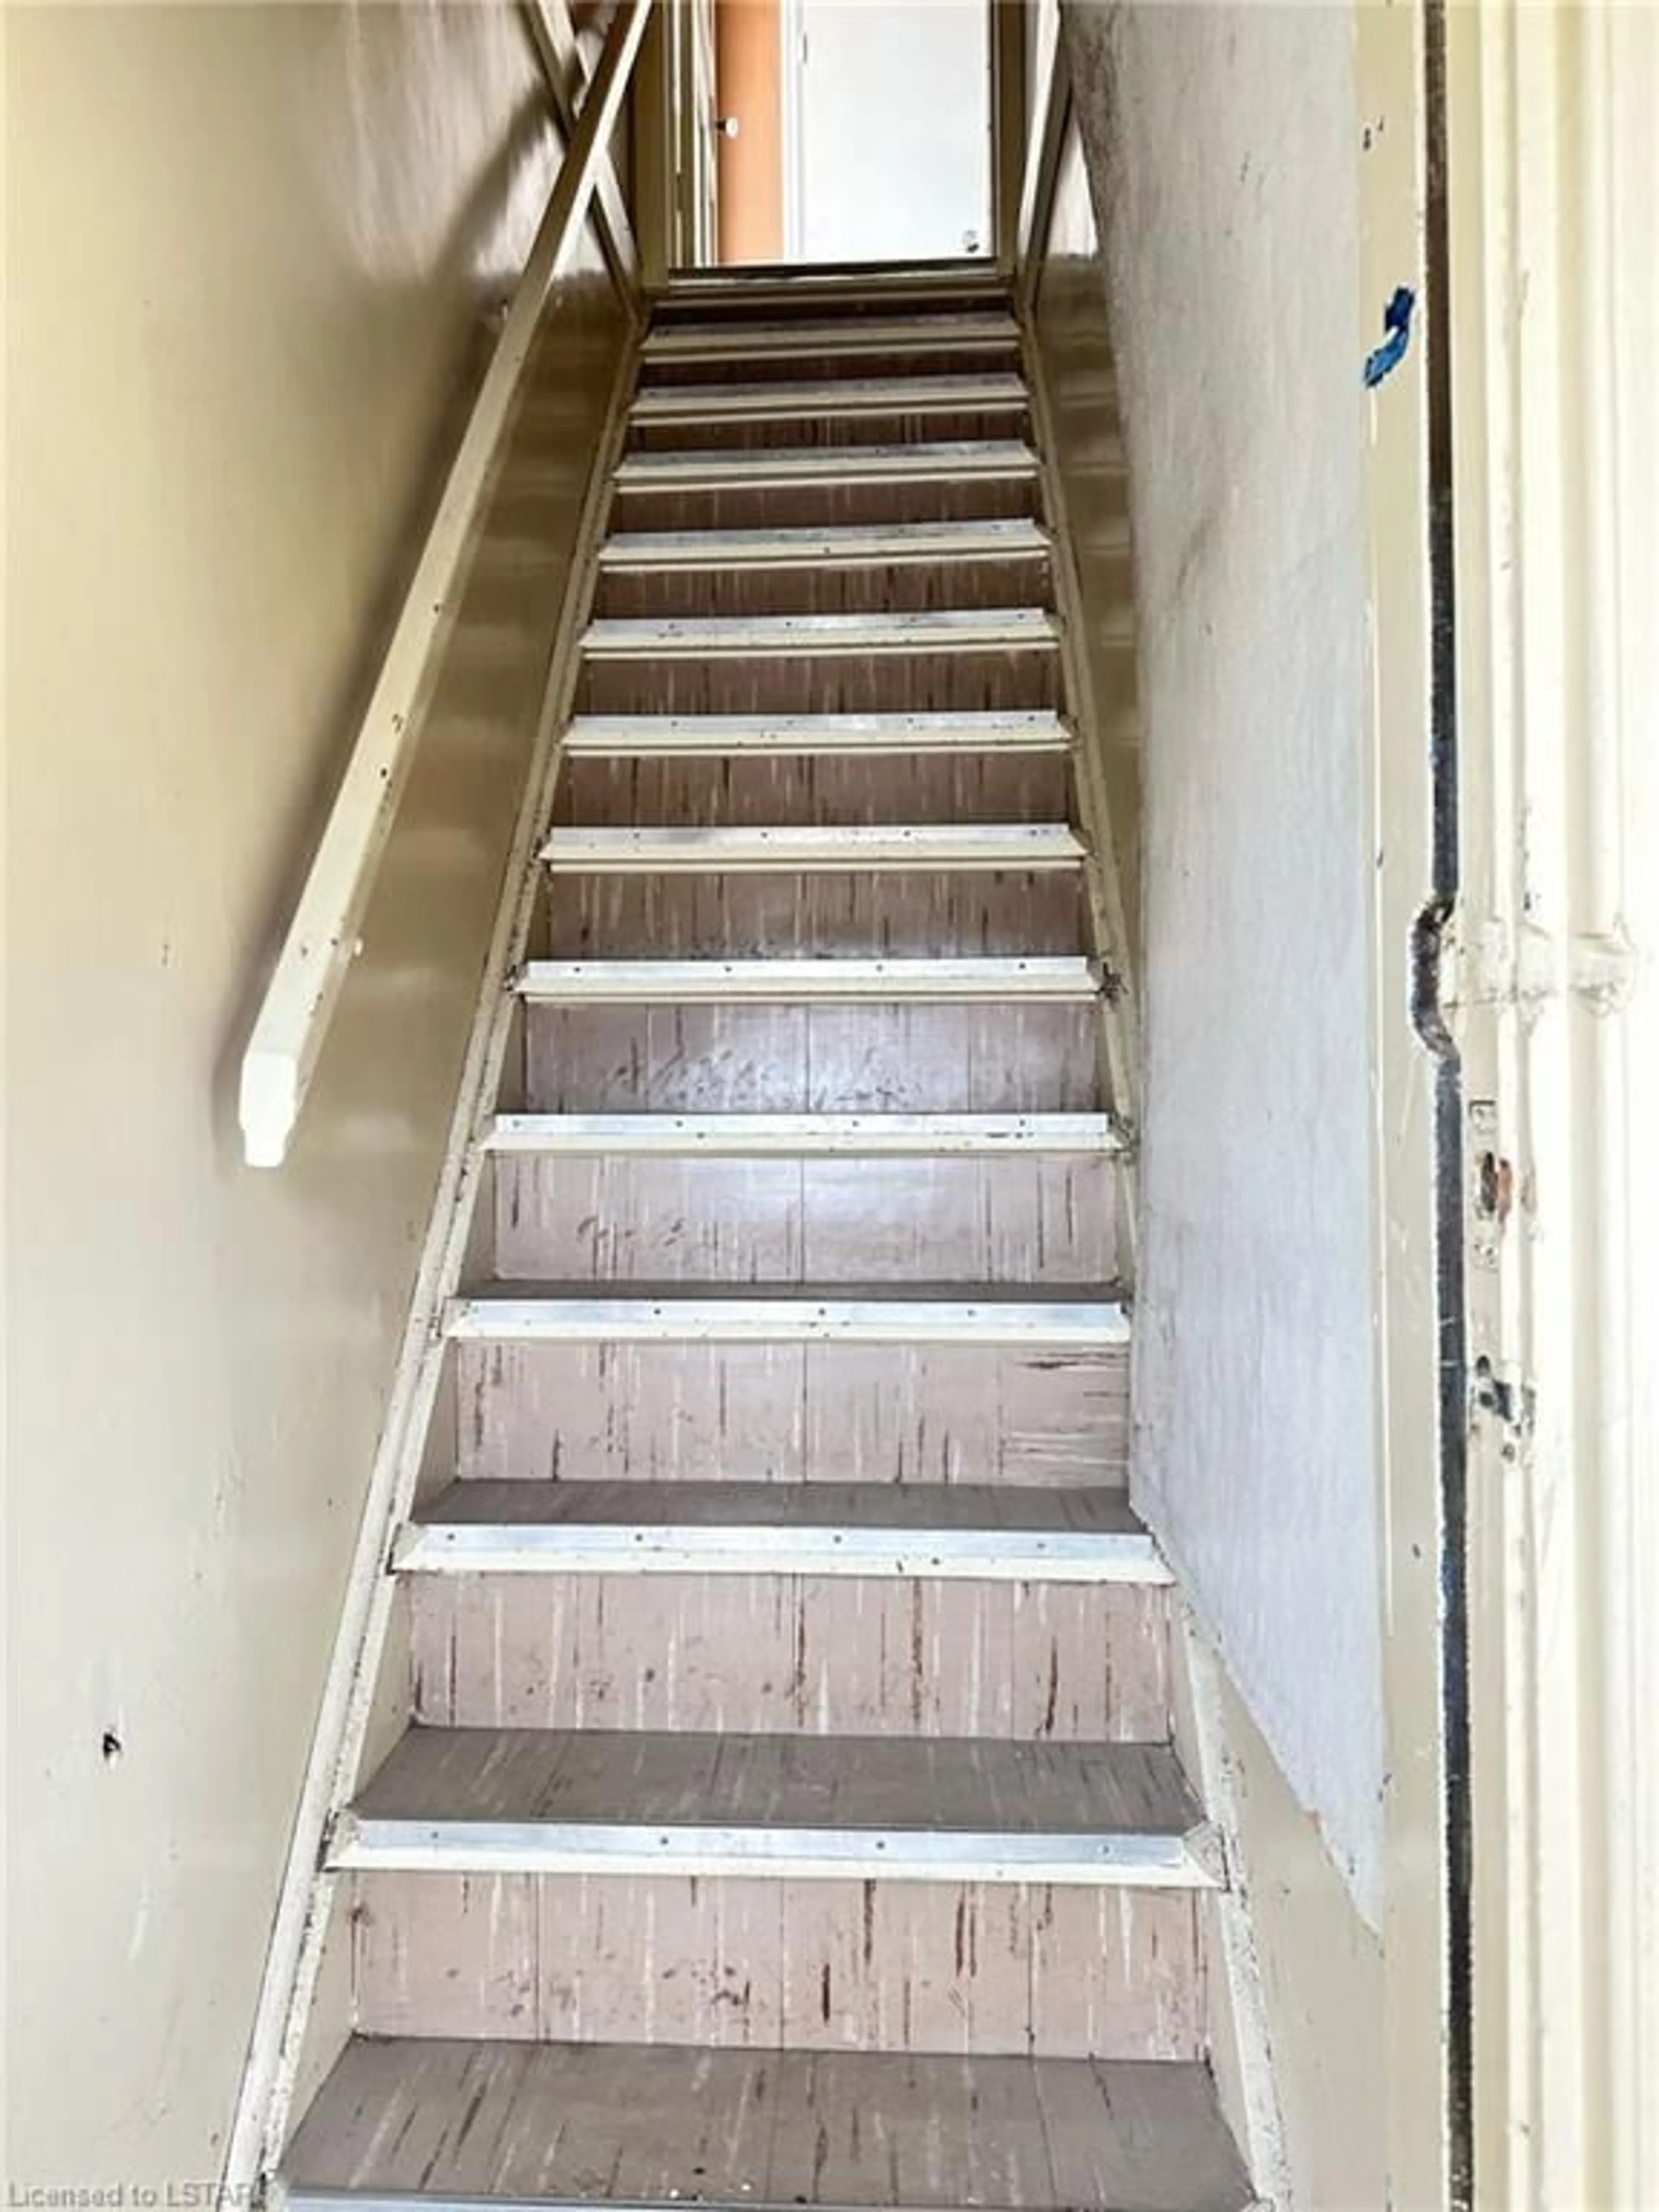 Stairs for 801 Hamilton Rd, London Ontario N5Z 1V2